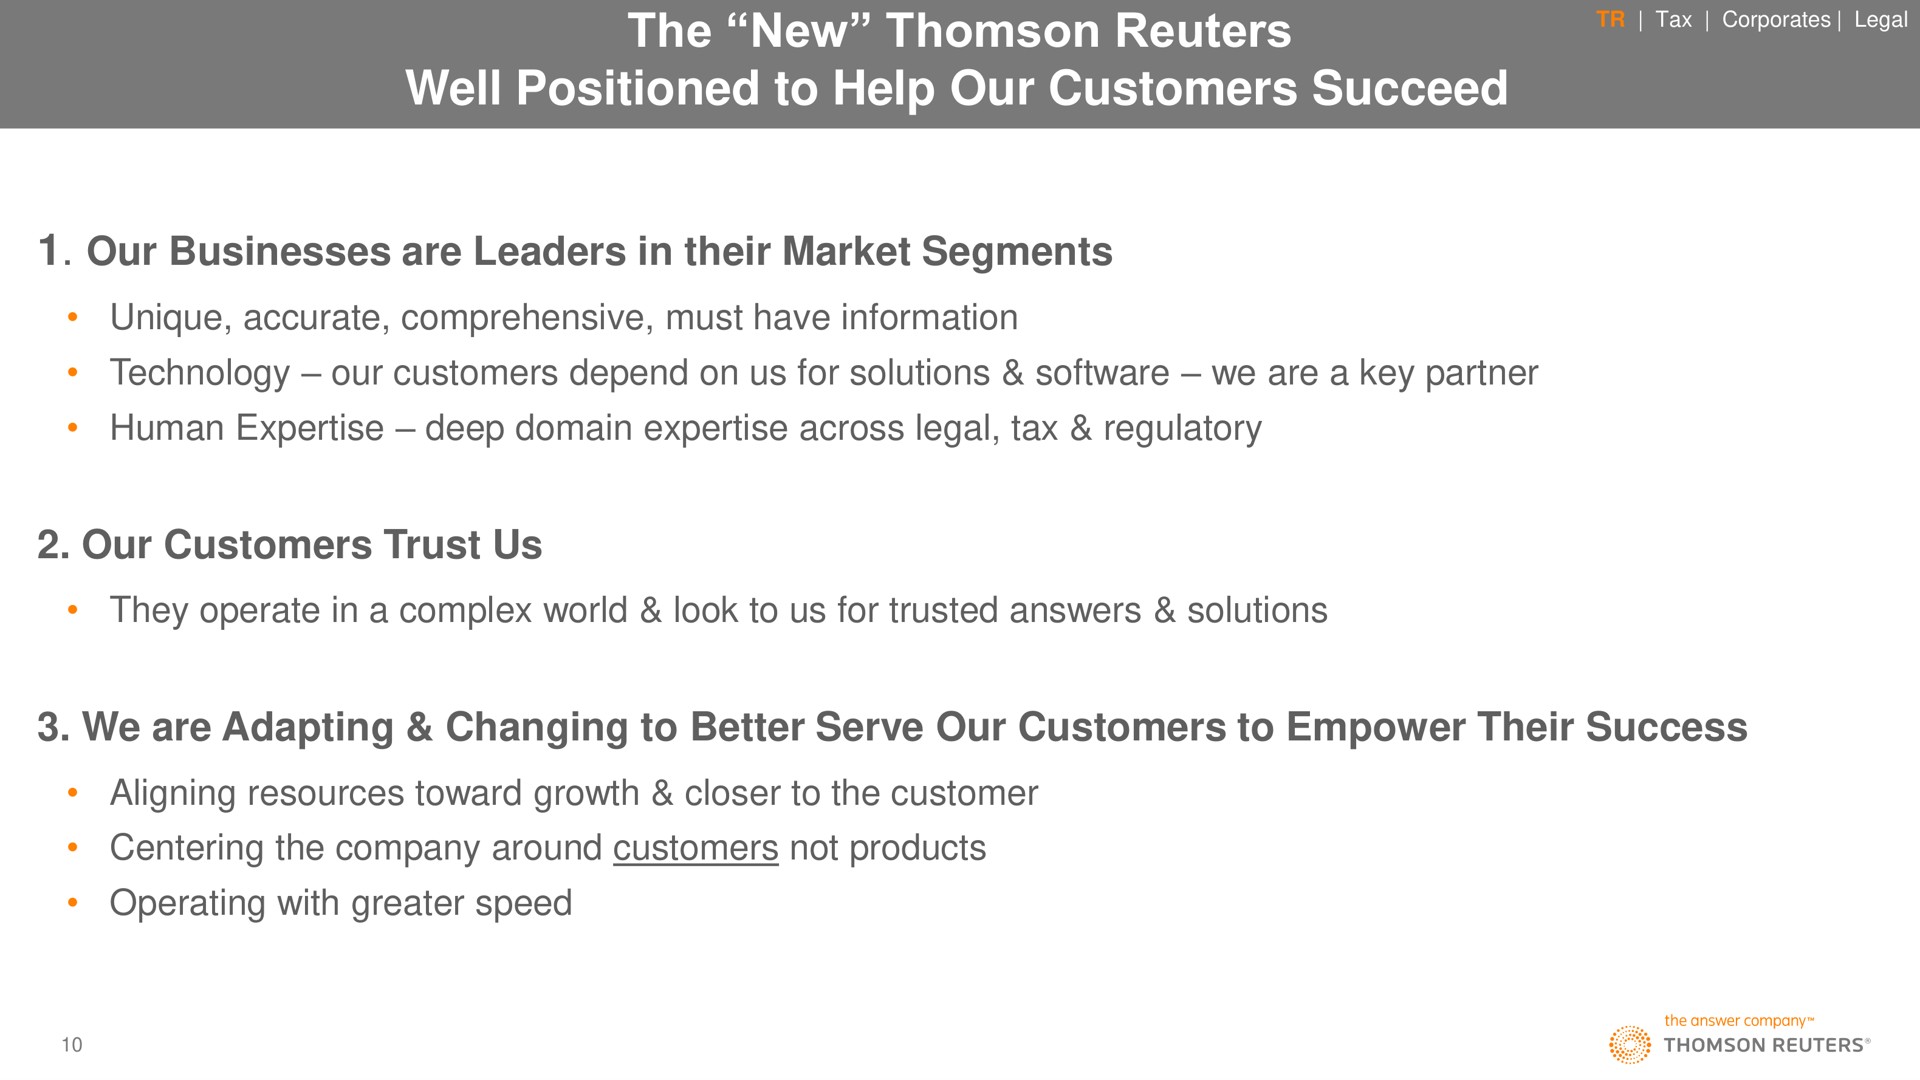 the new well positioned to help our customers succeed our businesses are leaders in their market segments our customers trust us we are adapting changing to better serve our customers to empower their success | Thomson Reuters